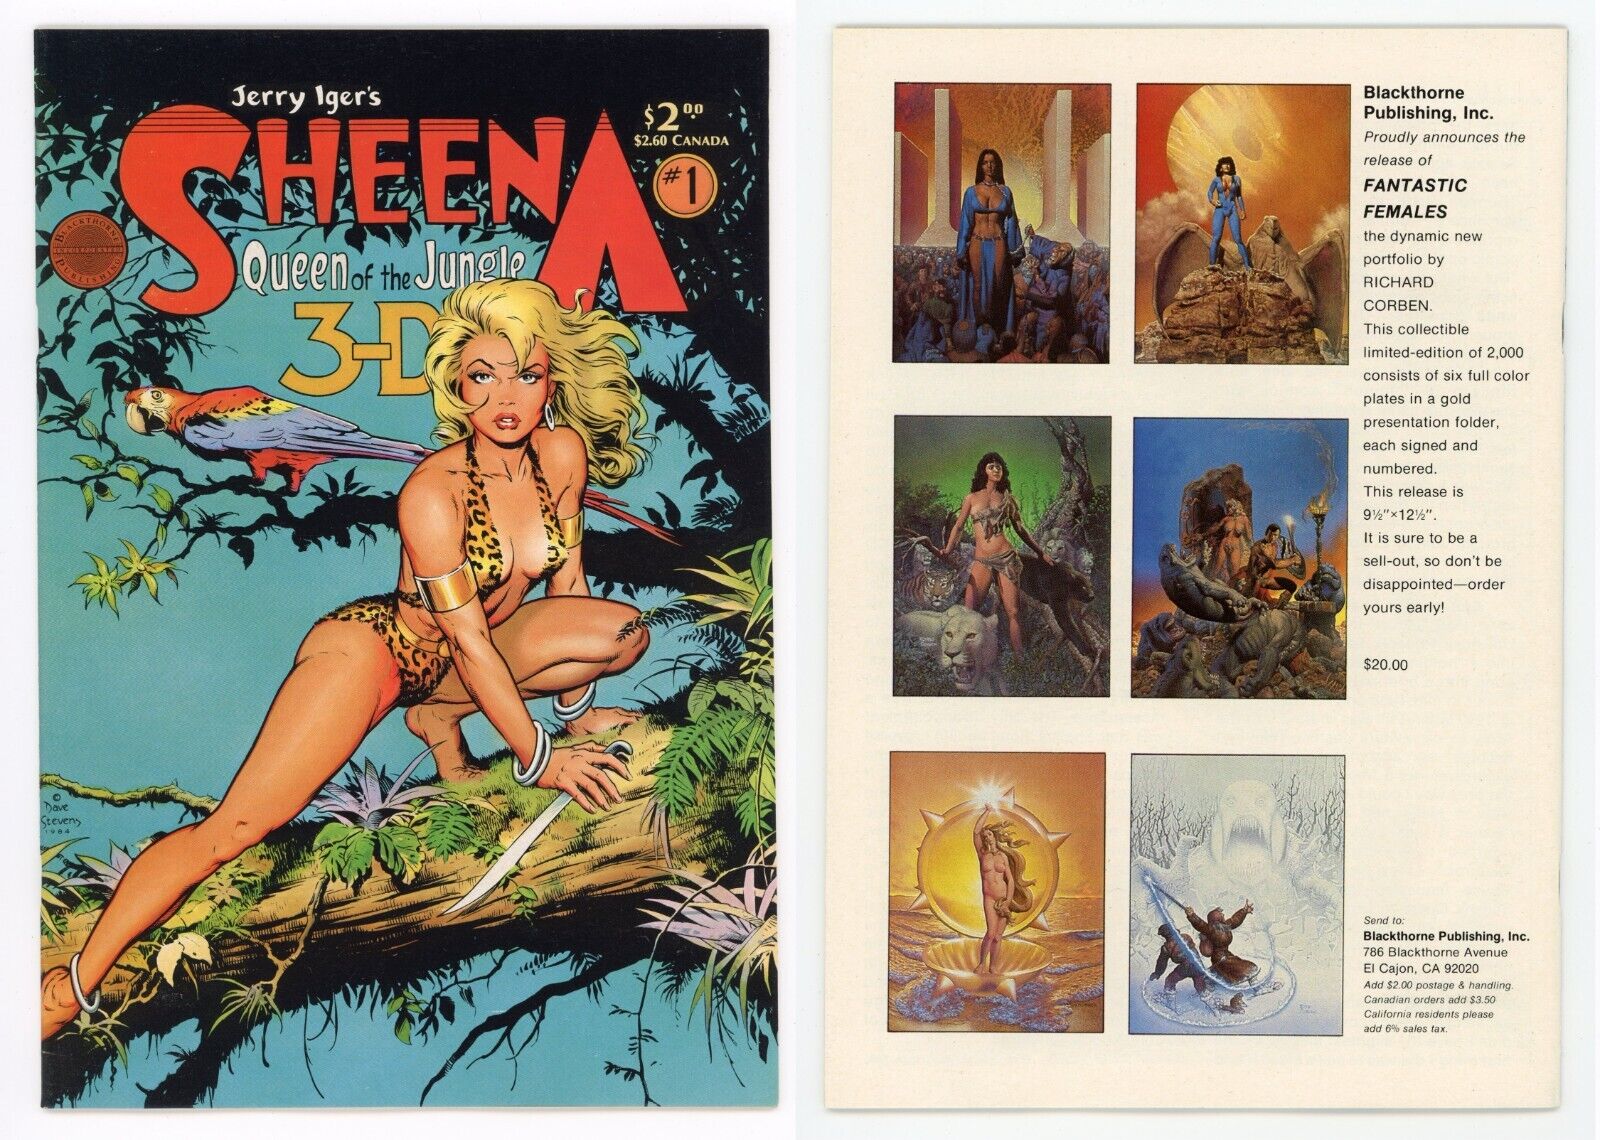 Sheena 3-D Special #1 NM- 9.2 Queen of the Jungle Dave Stevens 1985 Blackthorne